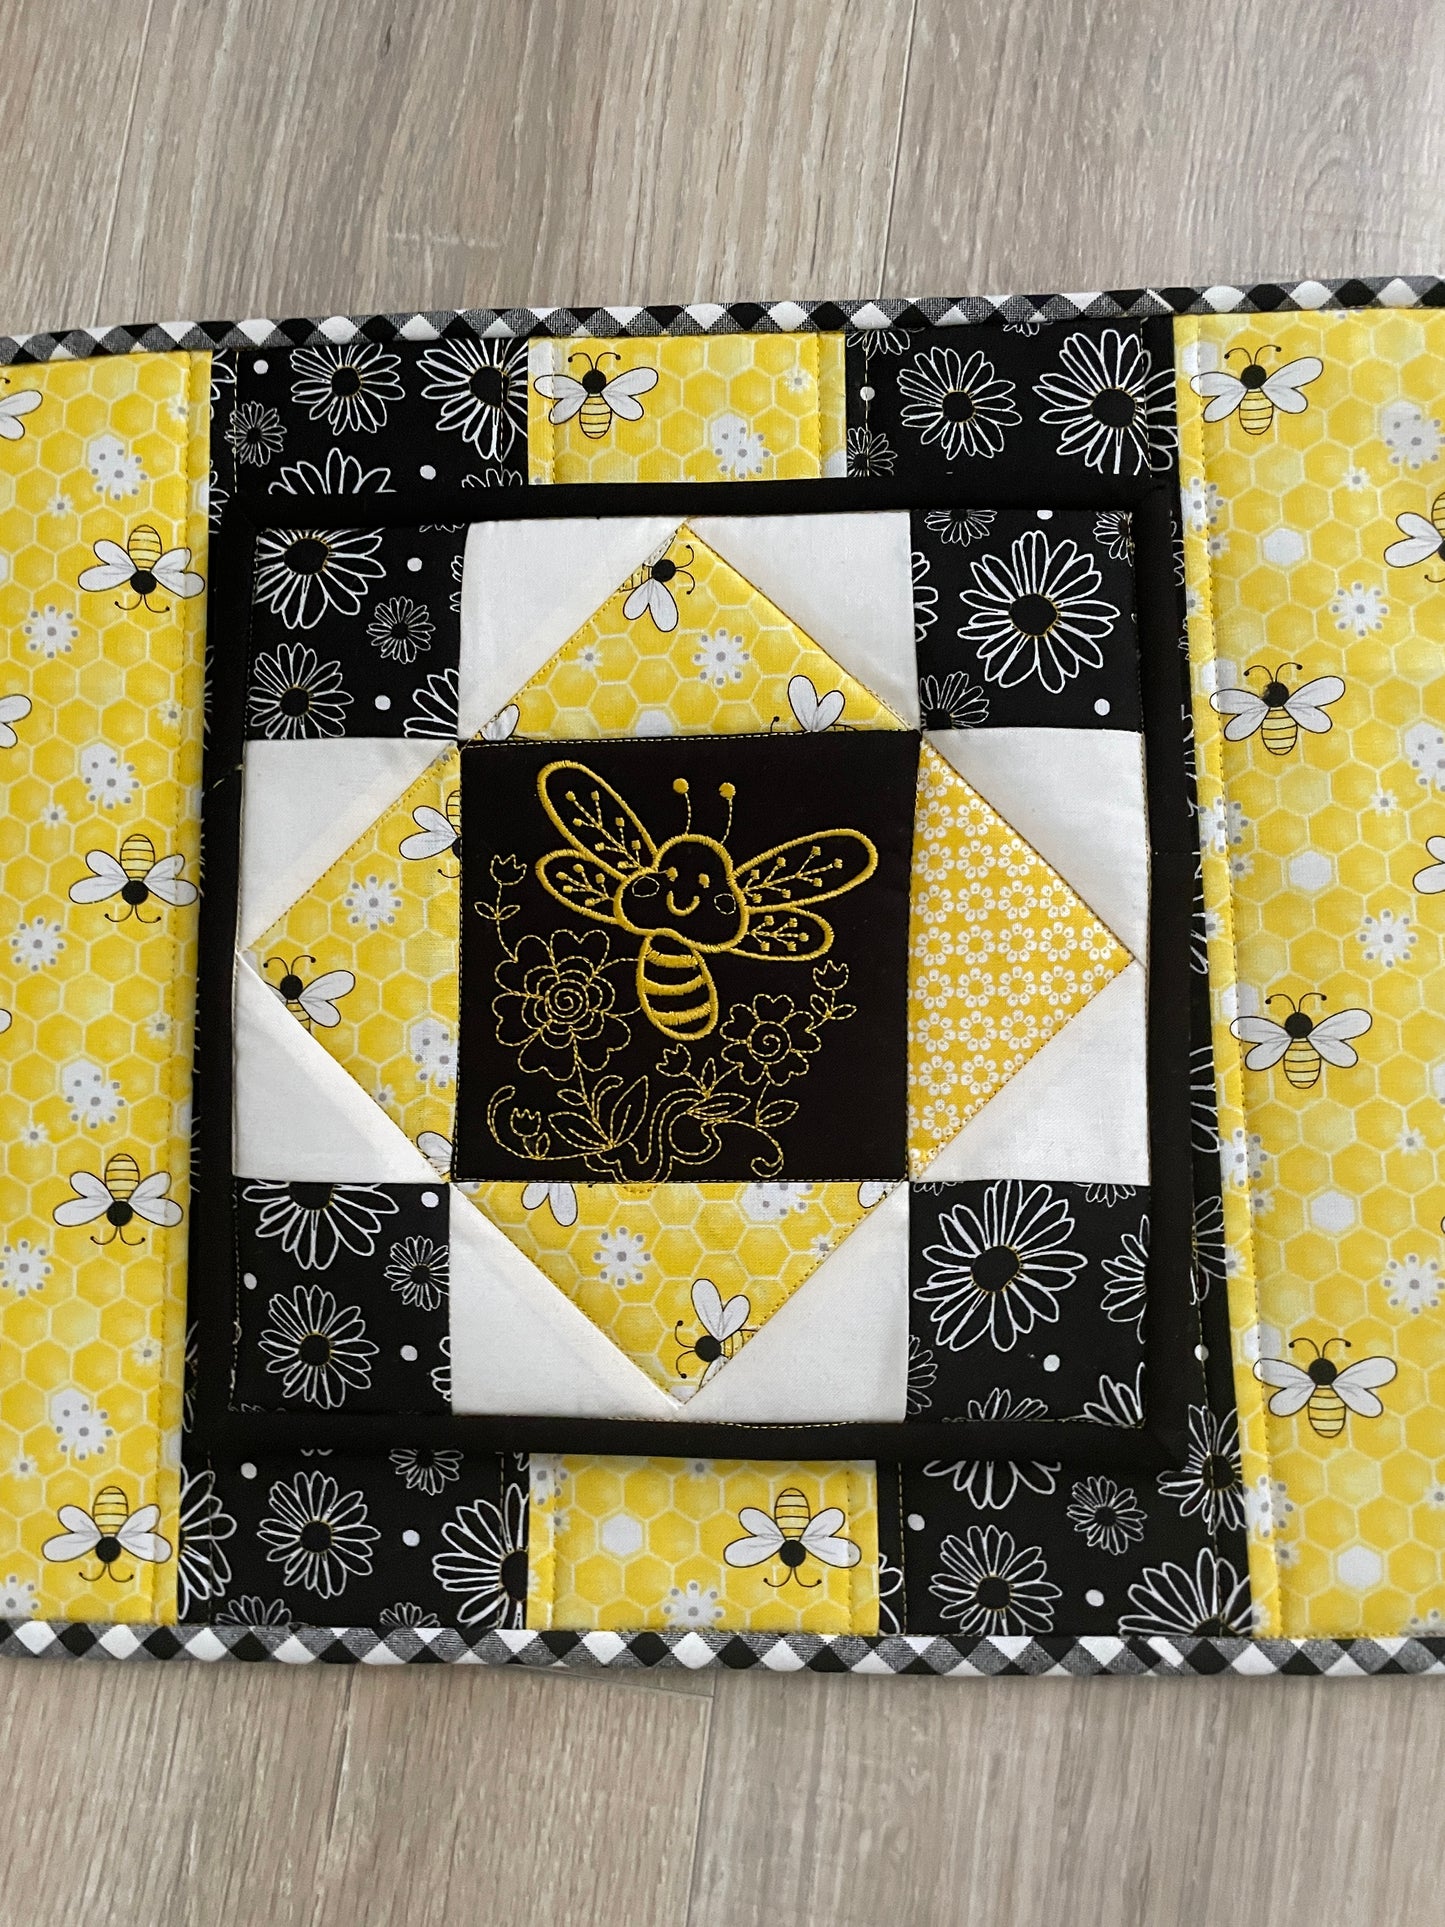 Quilted Casserole Hot Pad, Scrappy Patchwork Trivet and Potholder Gift